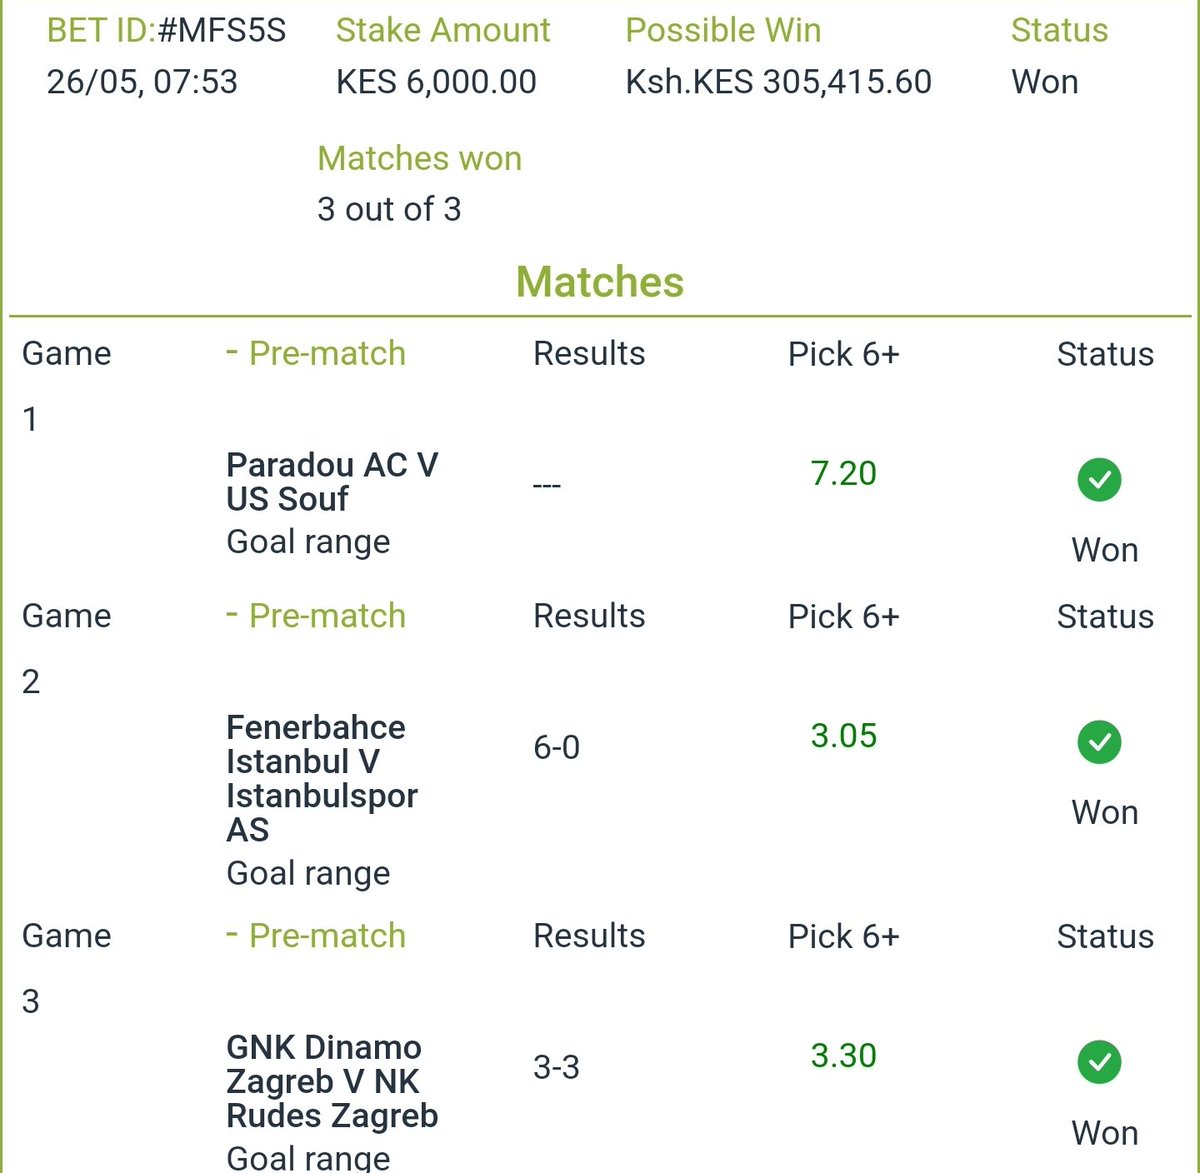 Booom  300k iko ndani🤑🤑🔥✅
Another massive win🤑🔥🔥🔥
Congratulations to everyone who placed this bet.  We are winning massively daily. RETWEET and Drop MPESA number.